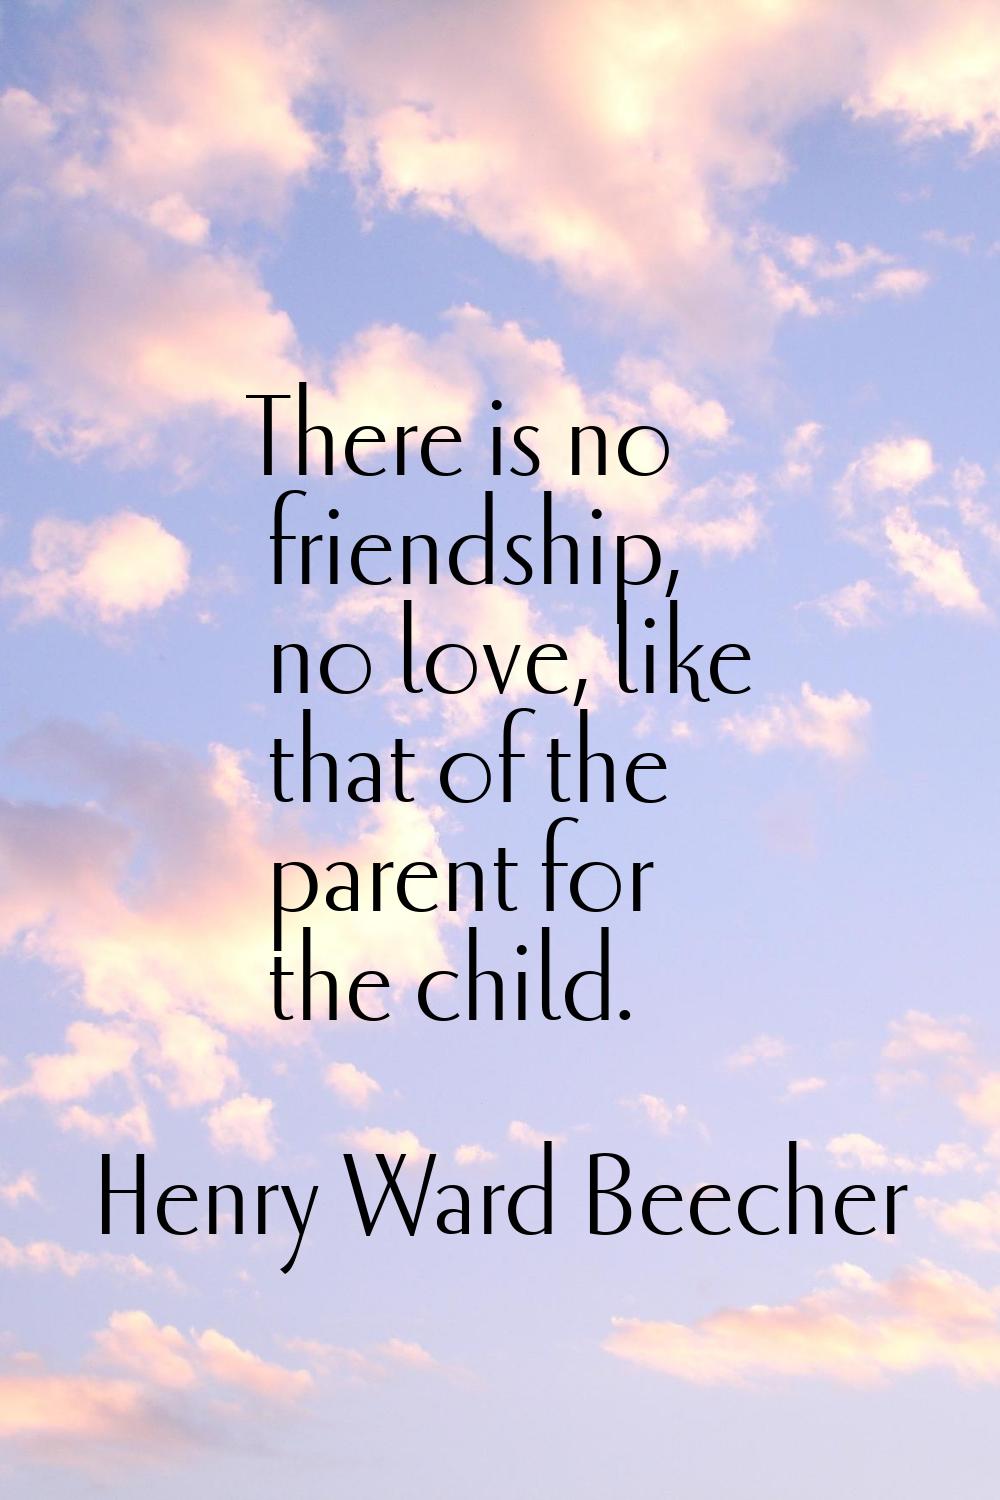 There is no friendship, no love, like that of the parent for the child.